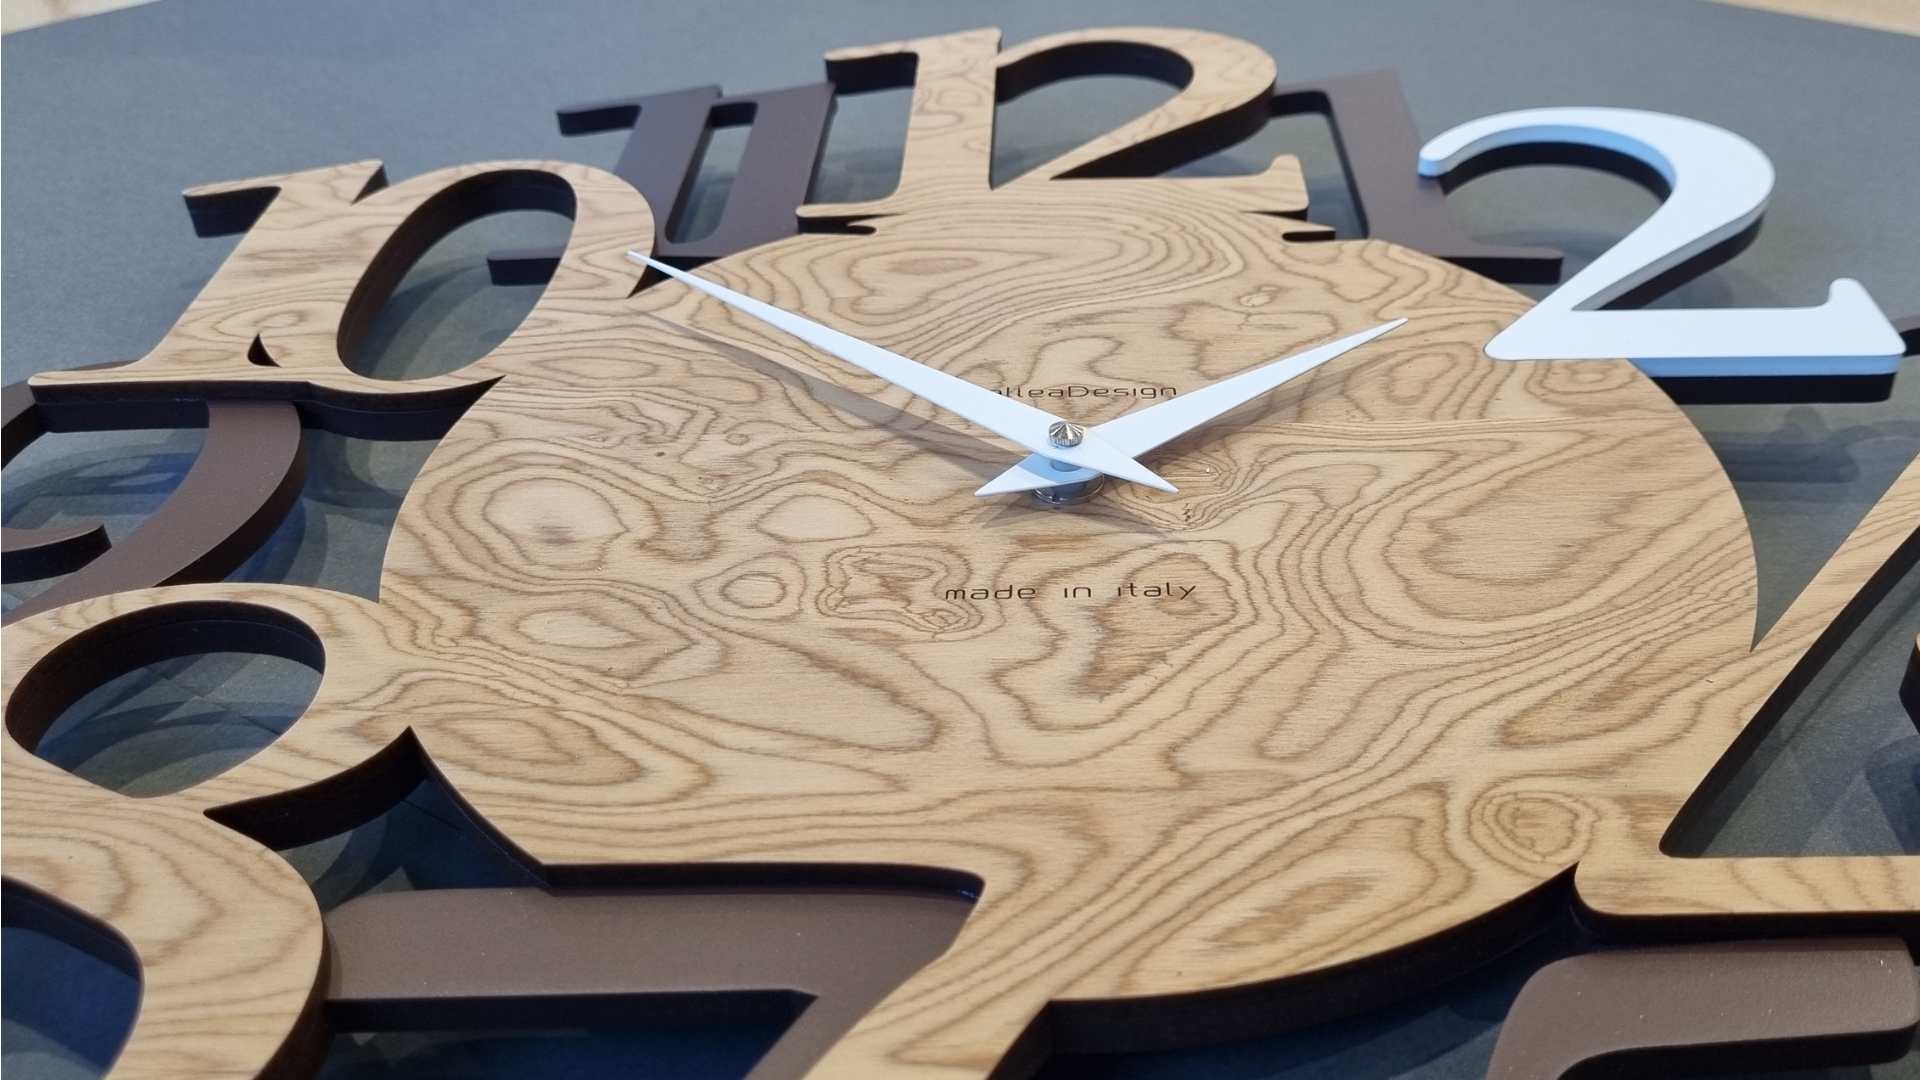 TIME AND DESIGN BECOME ONE